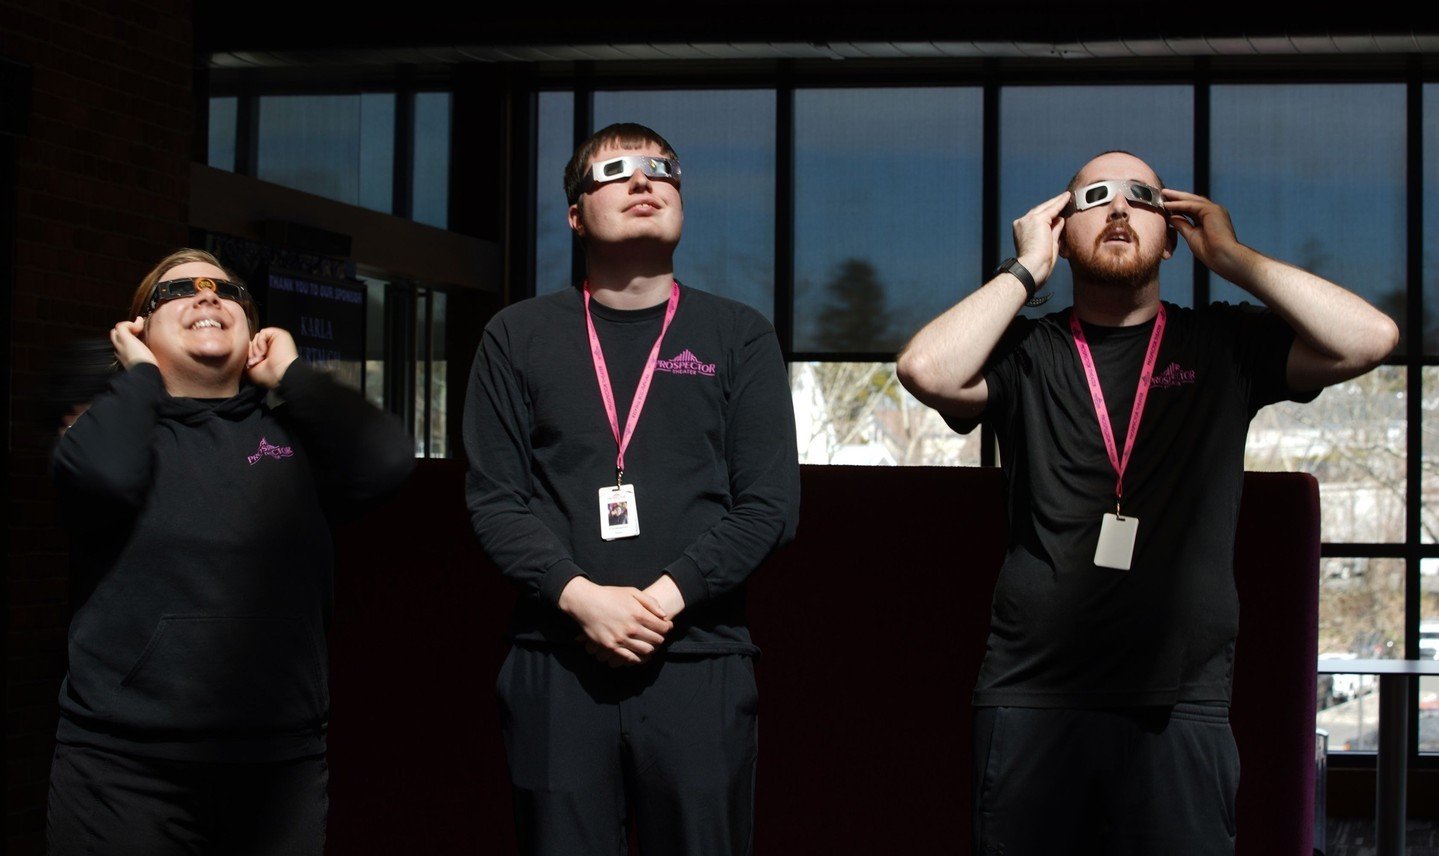 Prospects enjoying the solar eclipse today! 🌘🍿😎 ⁠
.⁠
.⁠
.⁠
.⁠
.⁠
Photo caption: Prospects stand outside the Theater wearing solar eclipse glasses as they look to the sky. #SparkleOn #ProspectorTheater #WorkingIsWorking #SolarEclipse